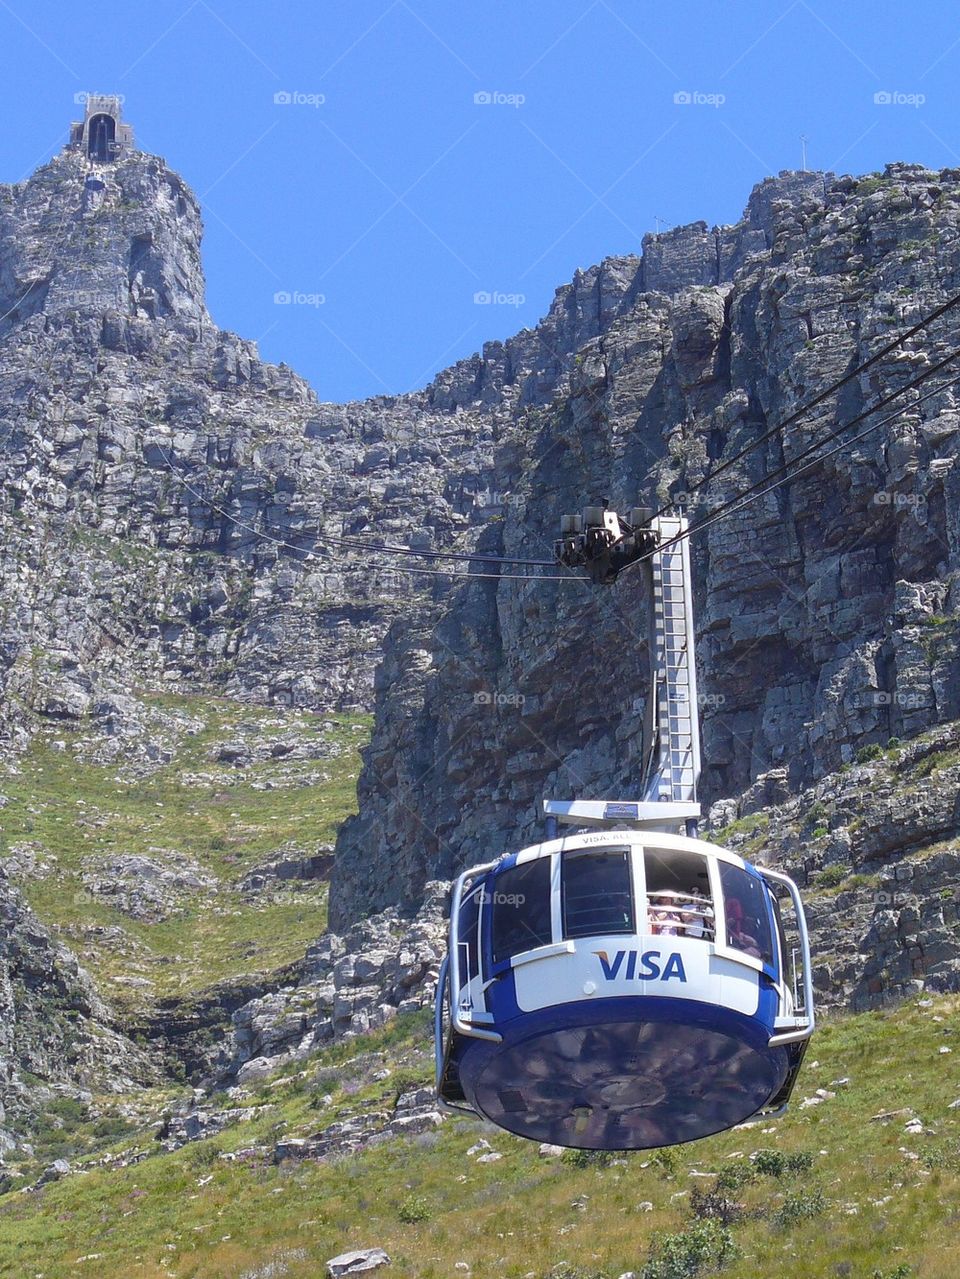 Table mountain, south africa